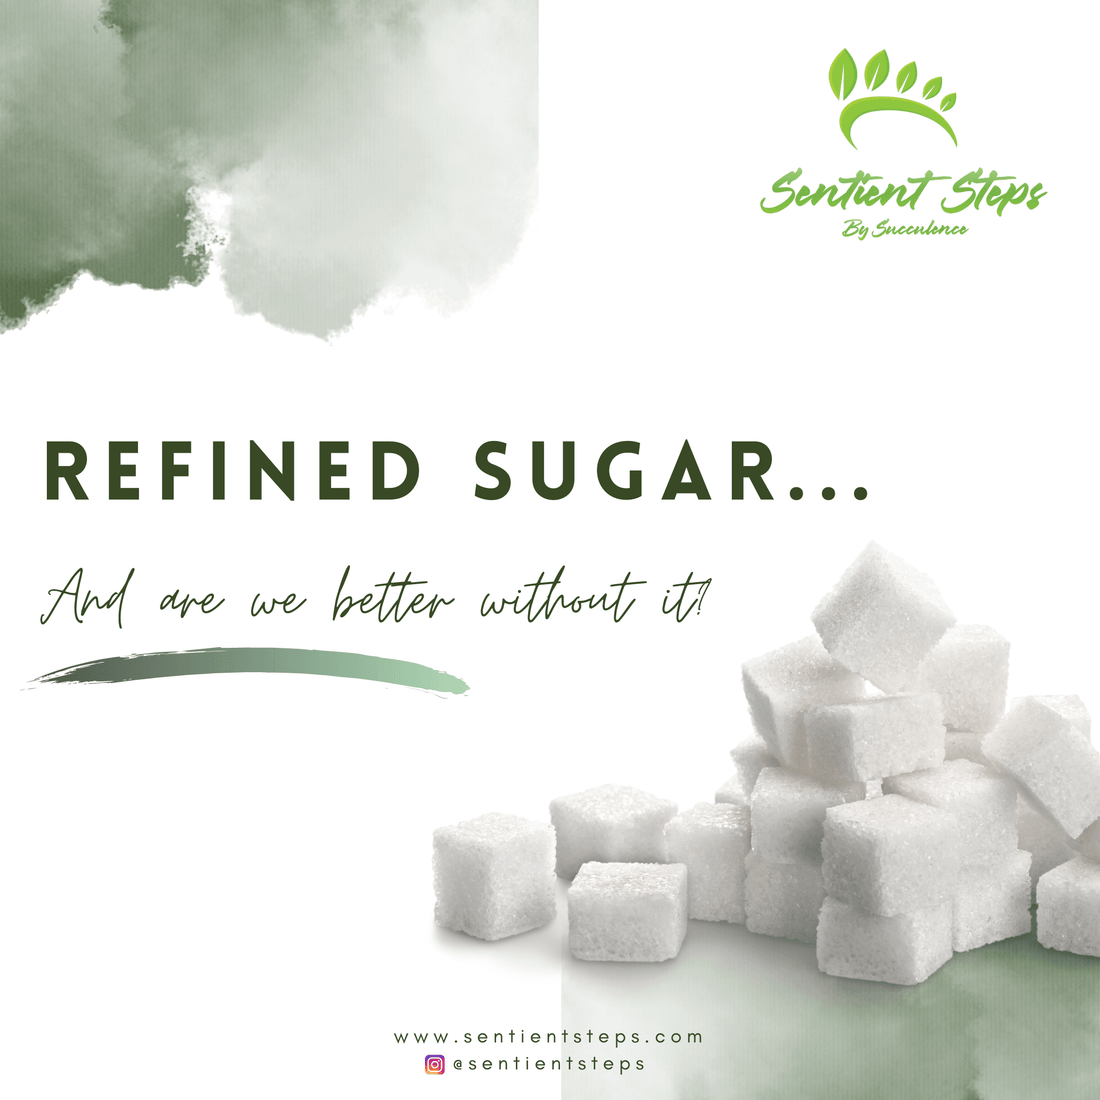 Refined sugar…And are we better without it? - Sentient Steps